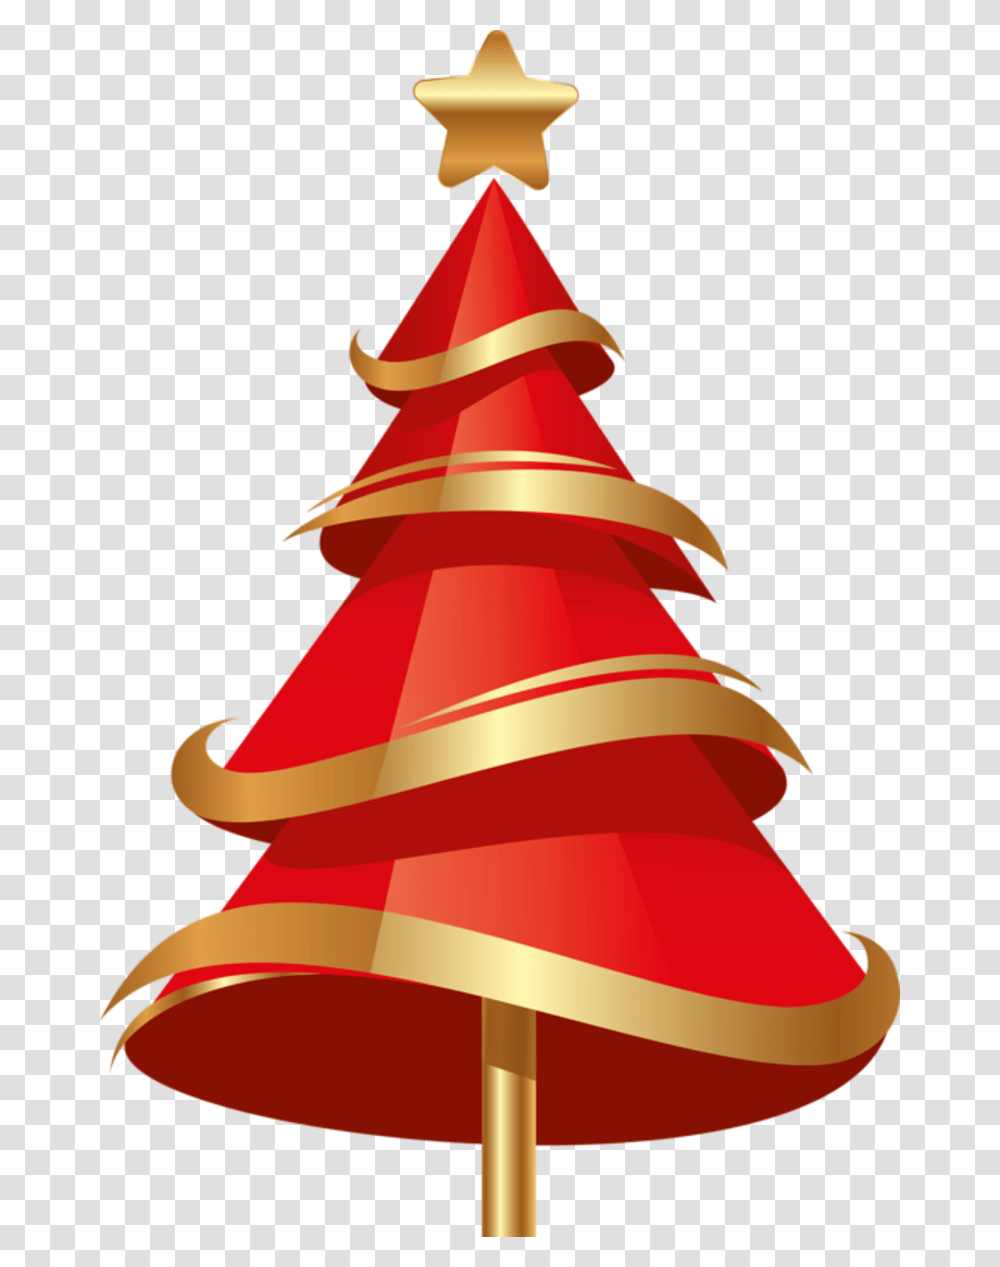 Clip Art Work Christmas Christmas Tree, Apparel, Hat, Party Hat Transparent Png